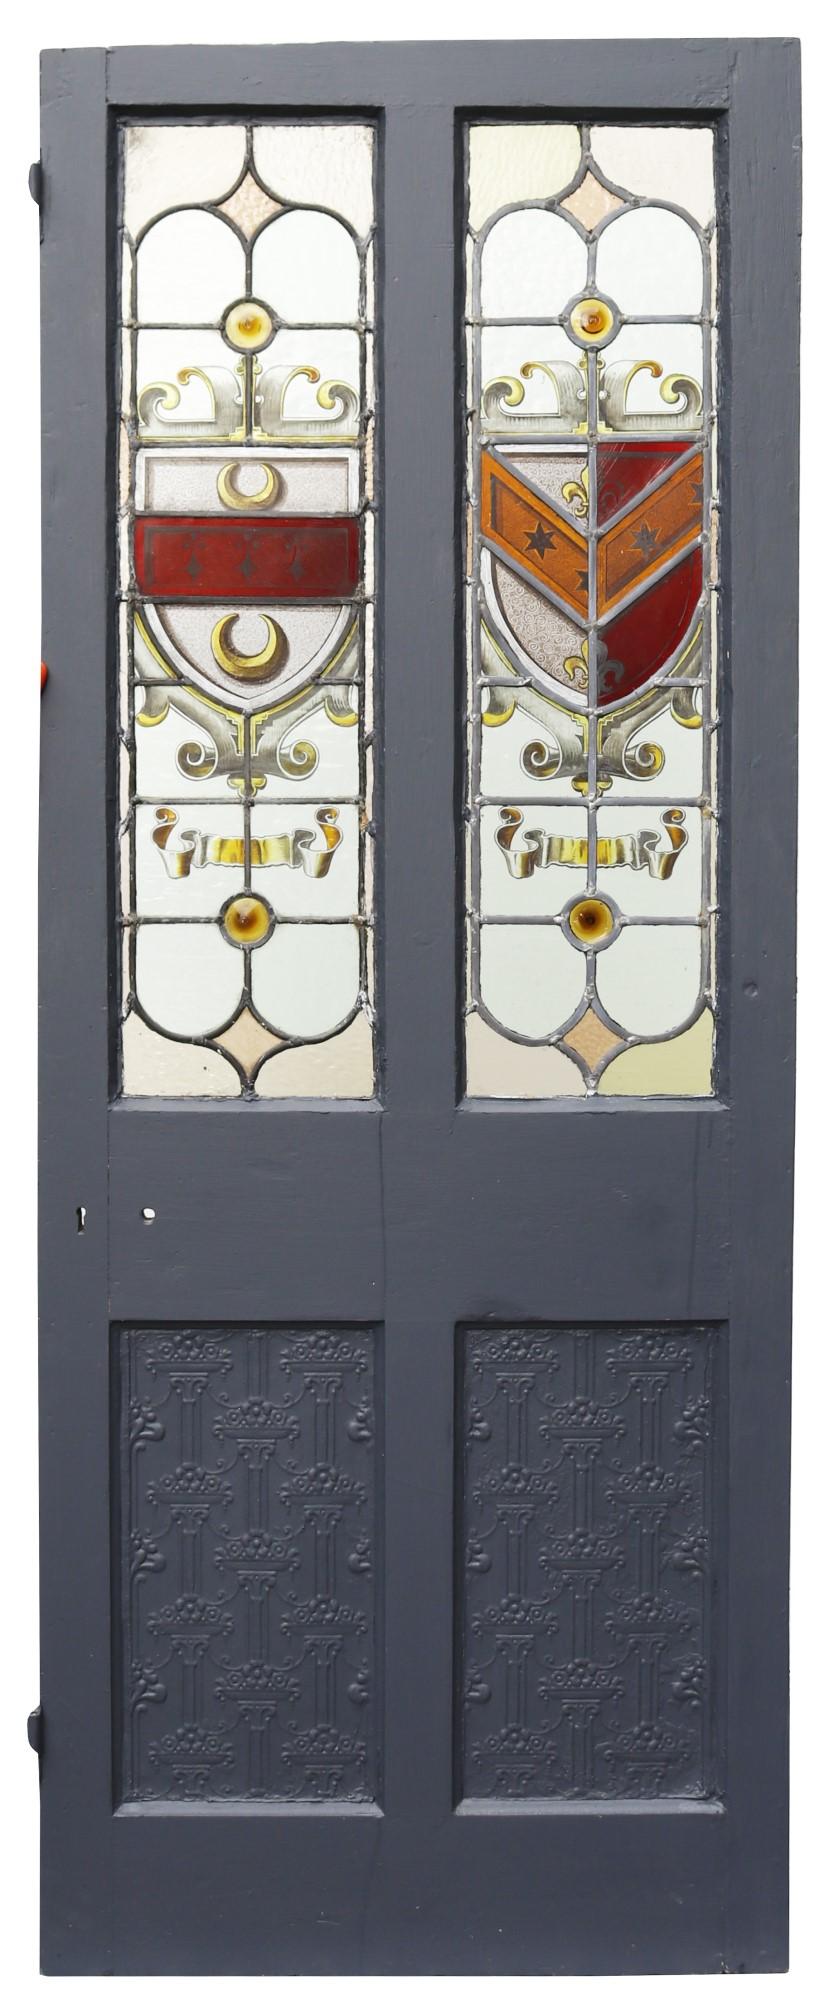 A painted pine door with impressive stained glass panels, suitable for interior use.

Patterned, embossed lower panels to the front, plain on reverse.

All stained glass is complete, without breaks.